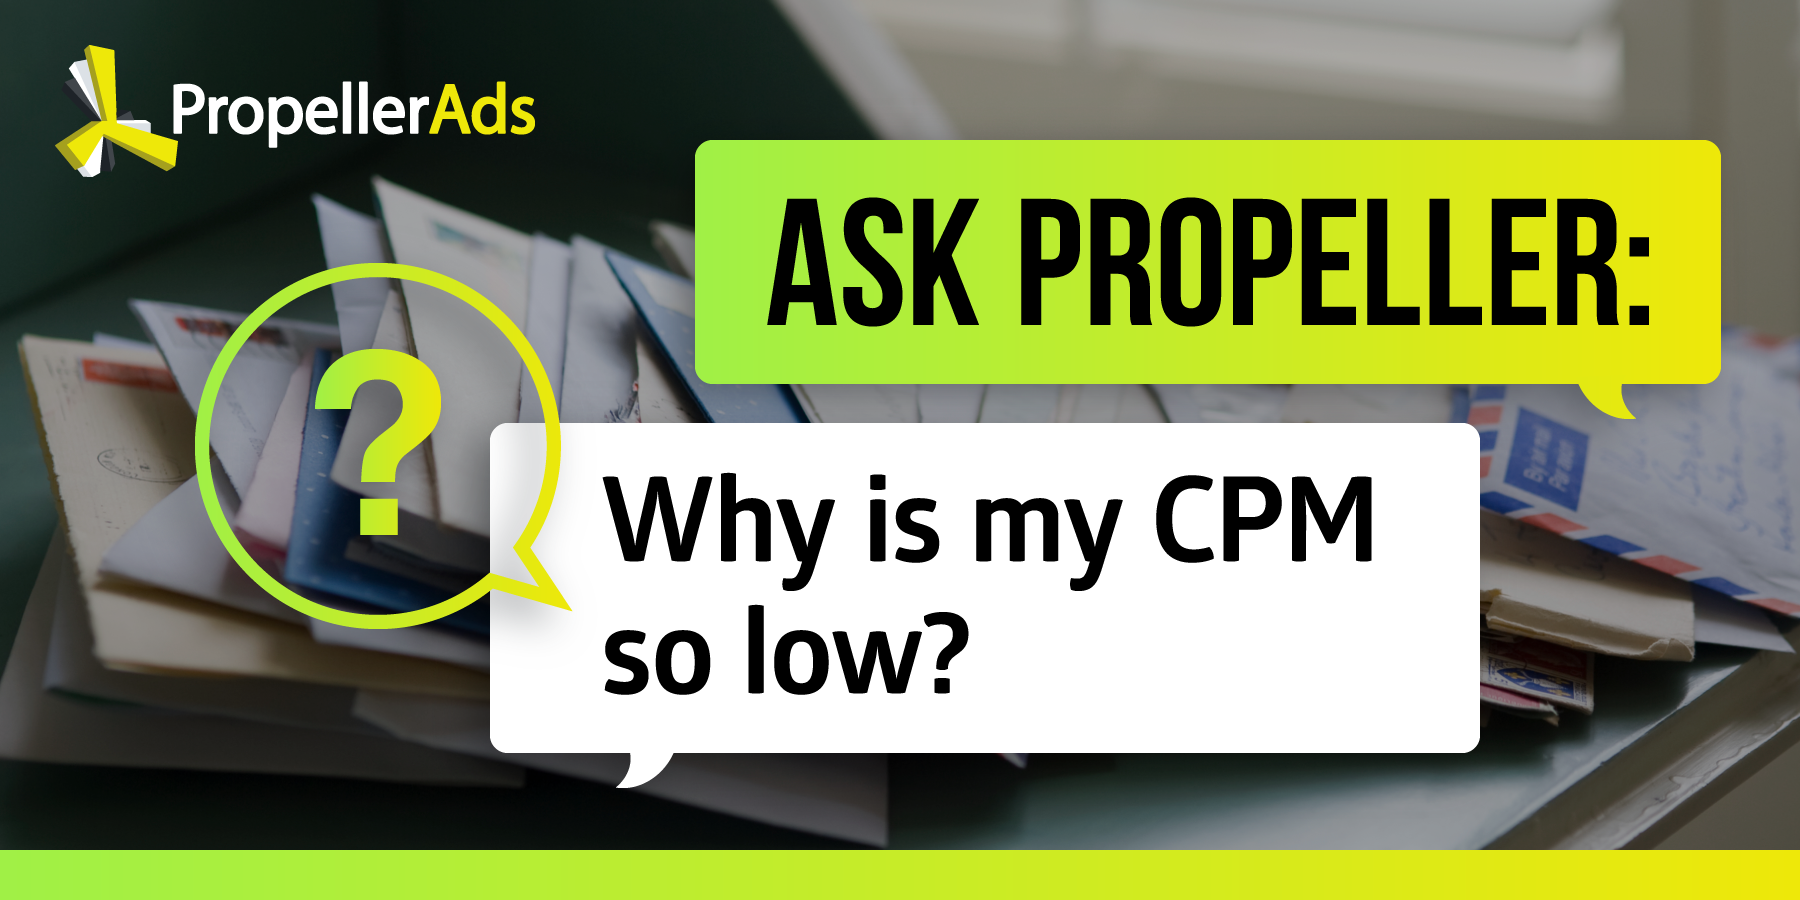 Why is my CPM so low?